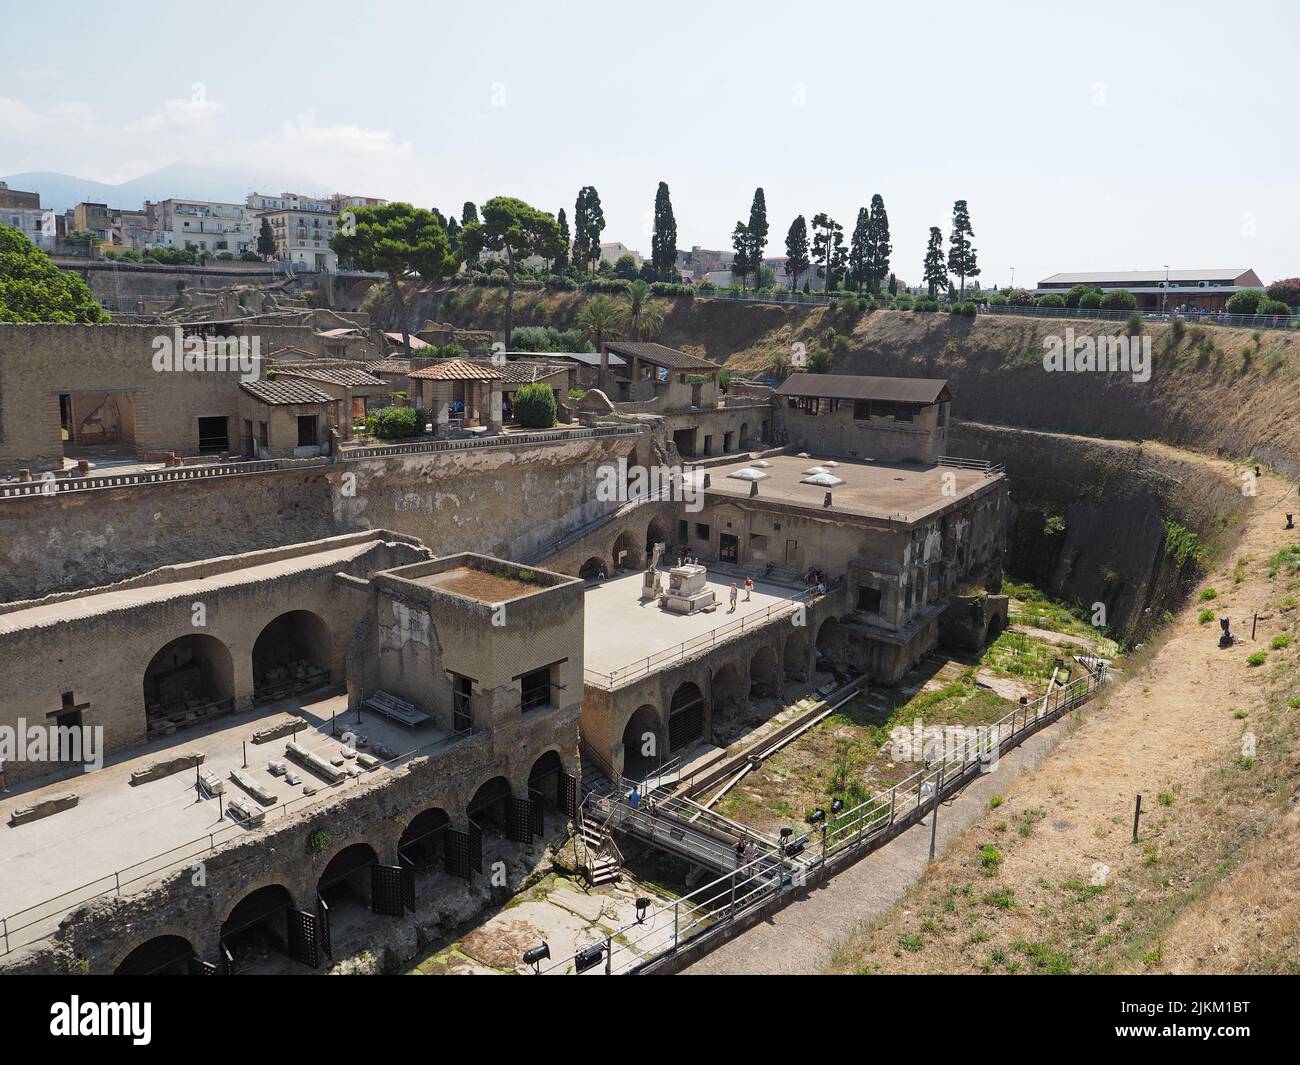 Overview of the Roman city Herculaneum excavation site in Ercolano, Campania, Italy Stock Photo